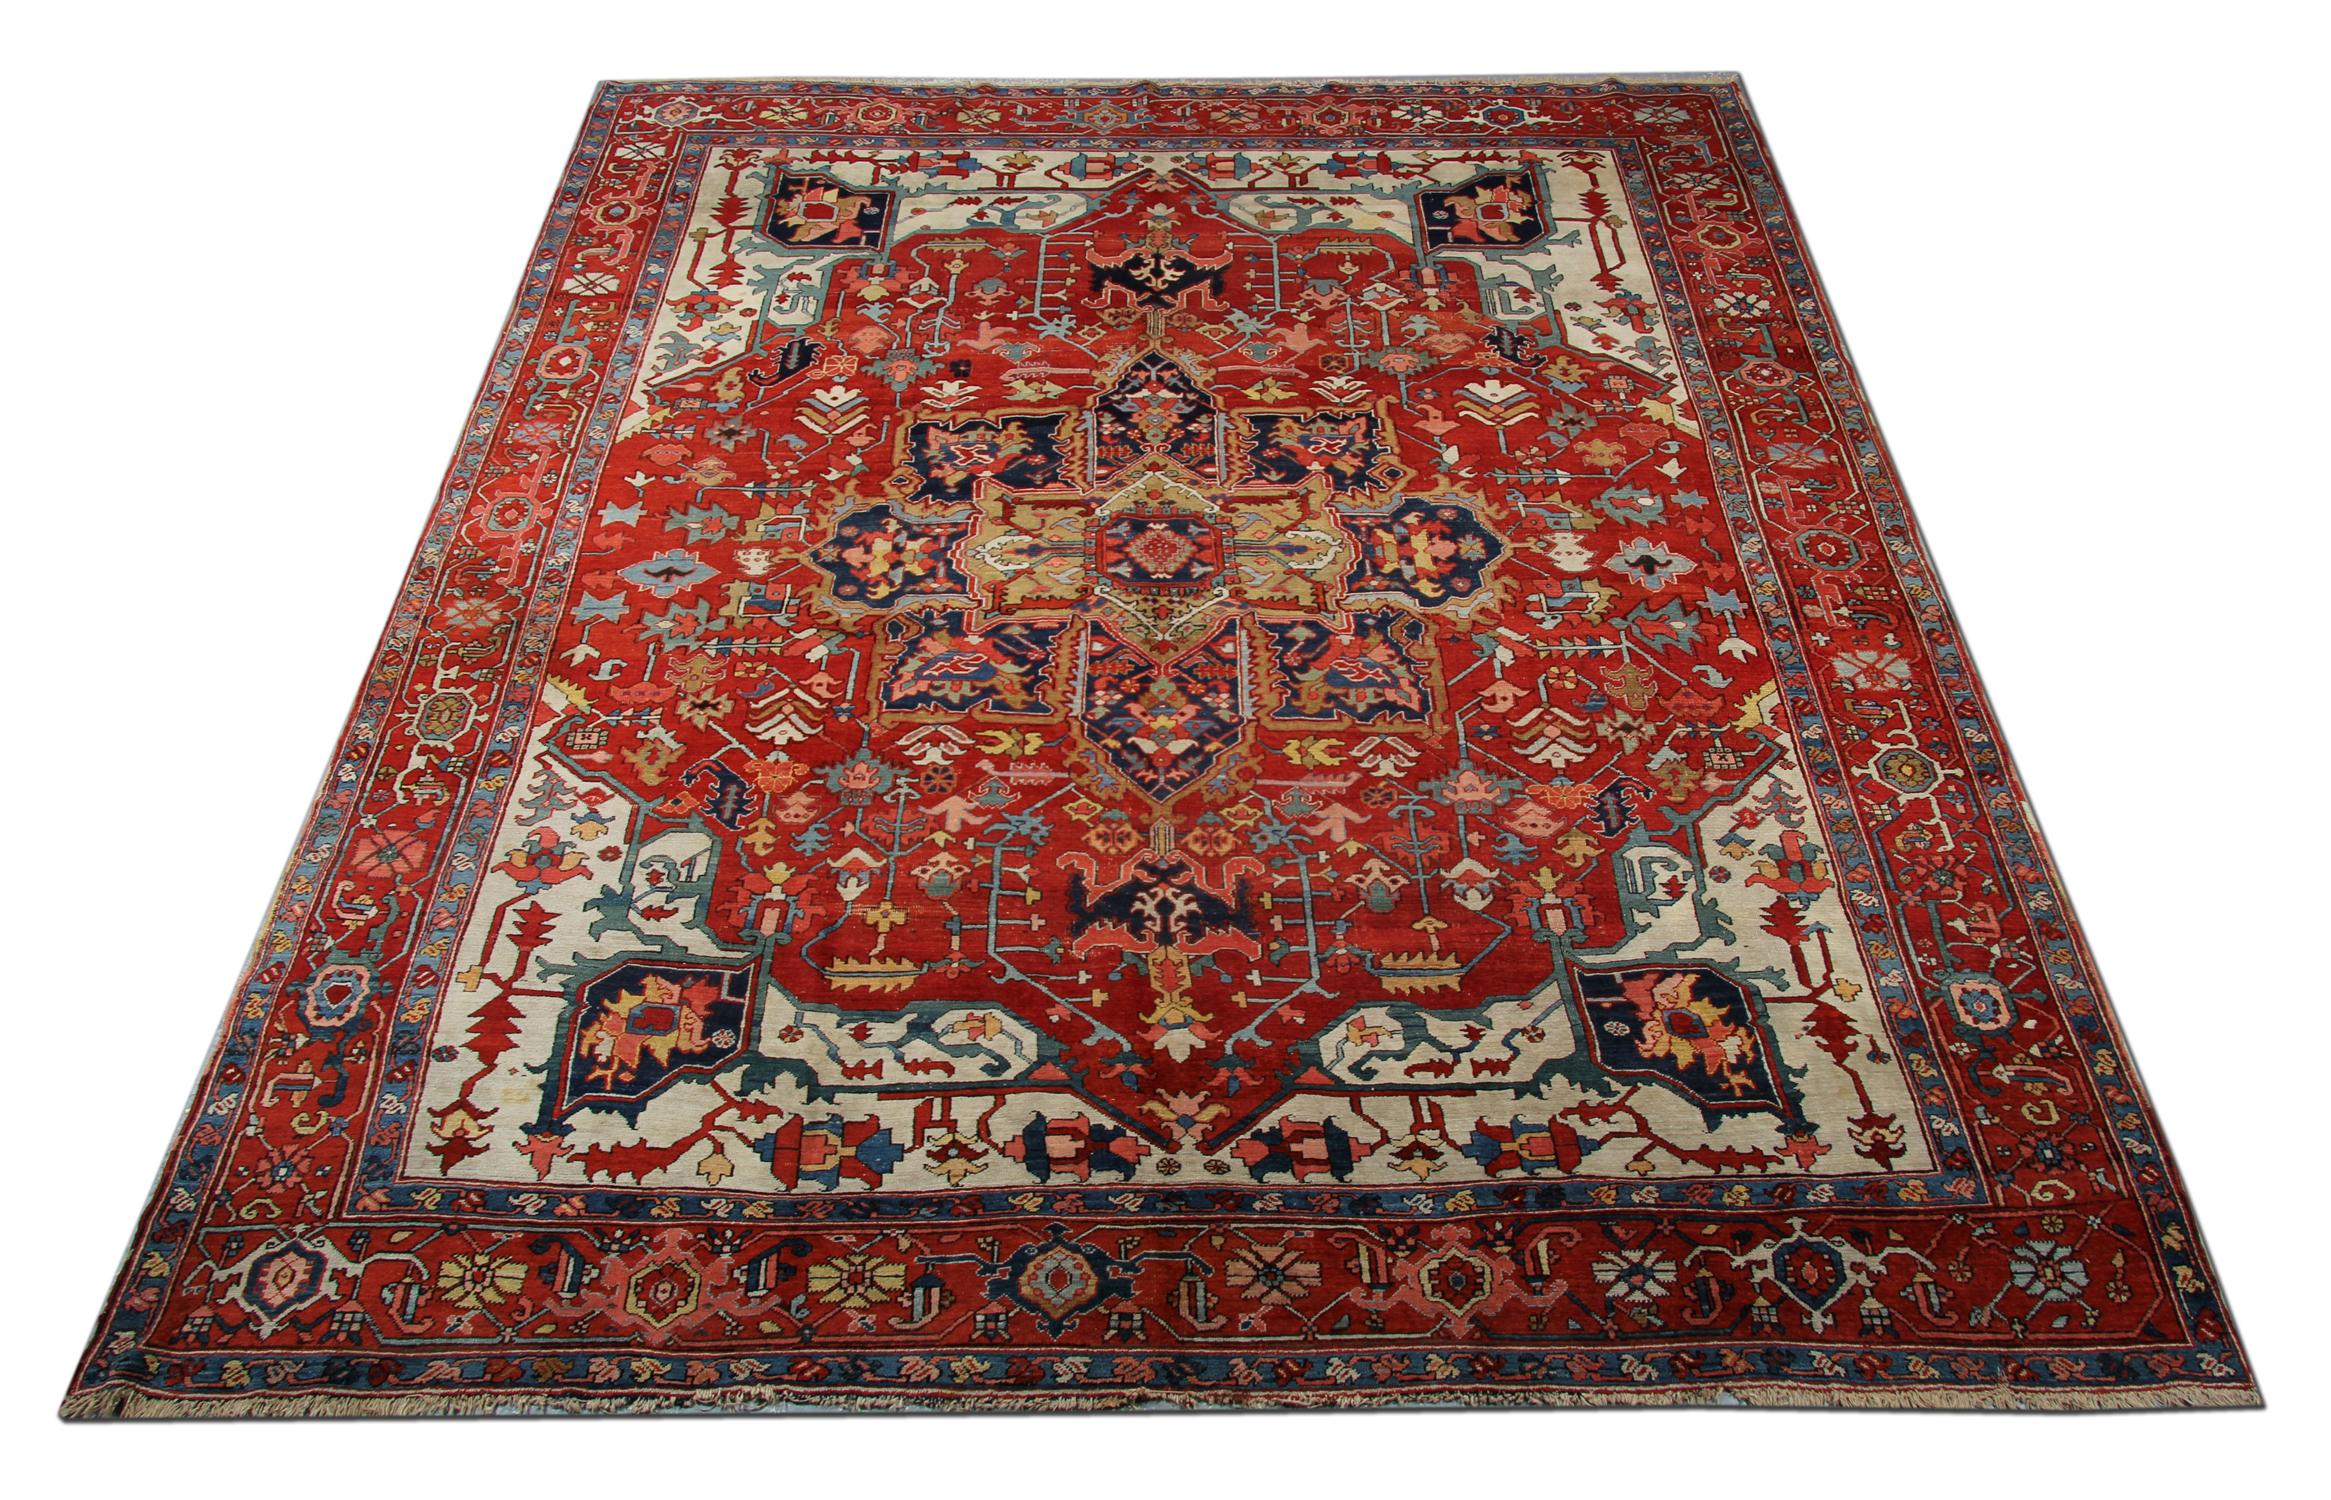 Looking for an antique rug to add that vintage feel to your interior style? This piece is suitable for any room and is sure to complement many styles. This stylish carpet paints a classic central medallion format with saturated contrasting colours.